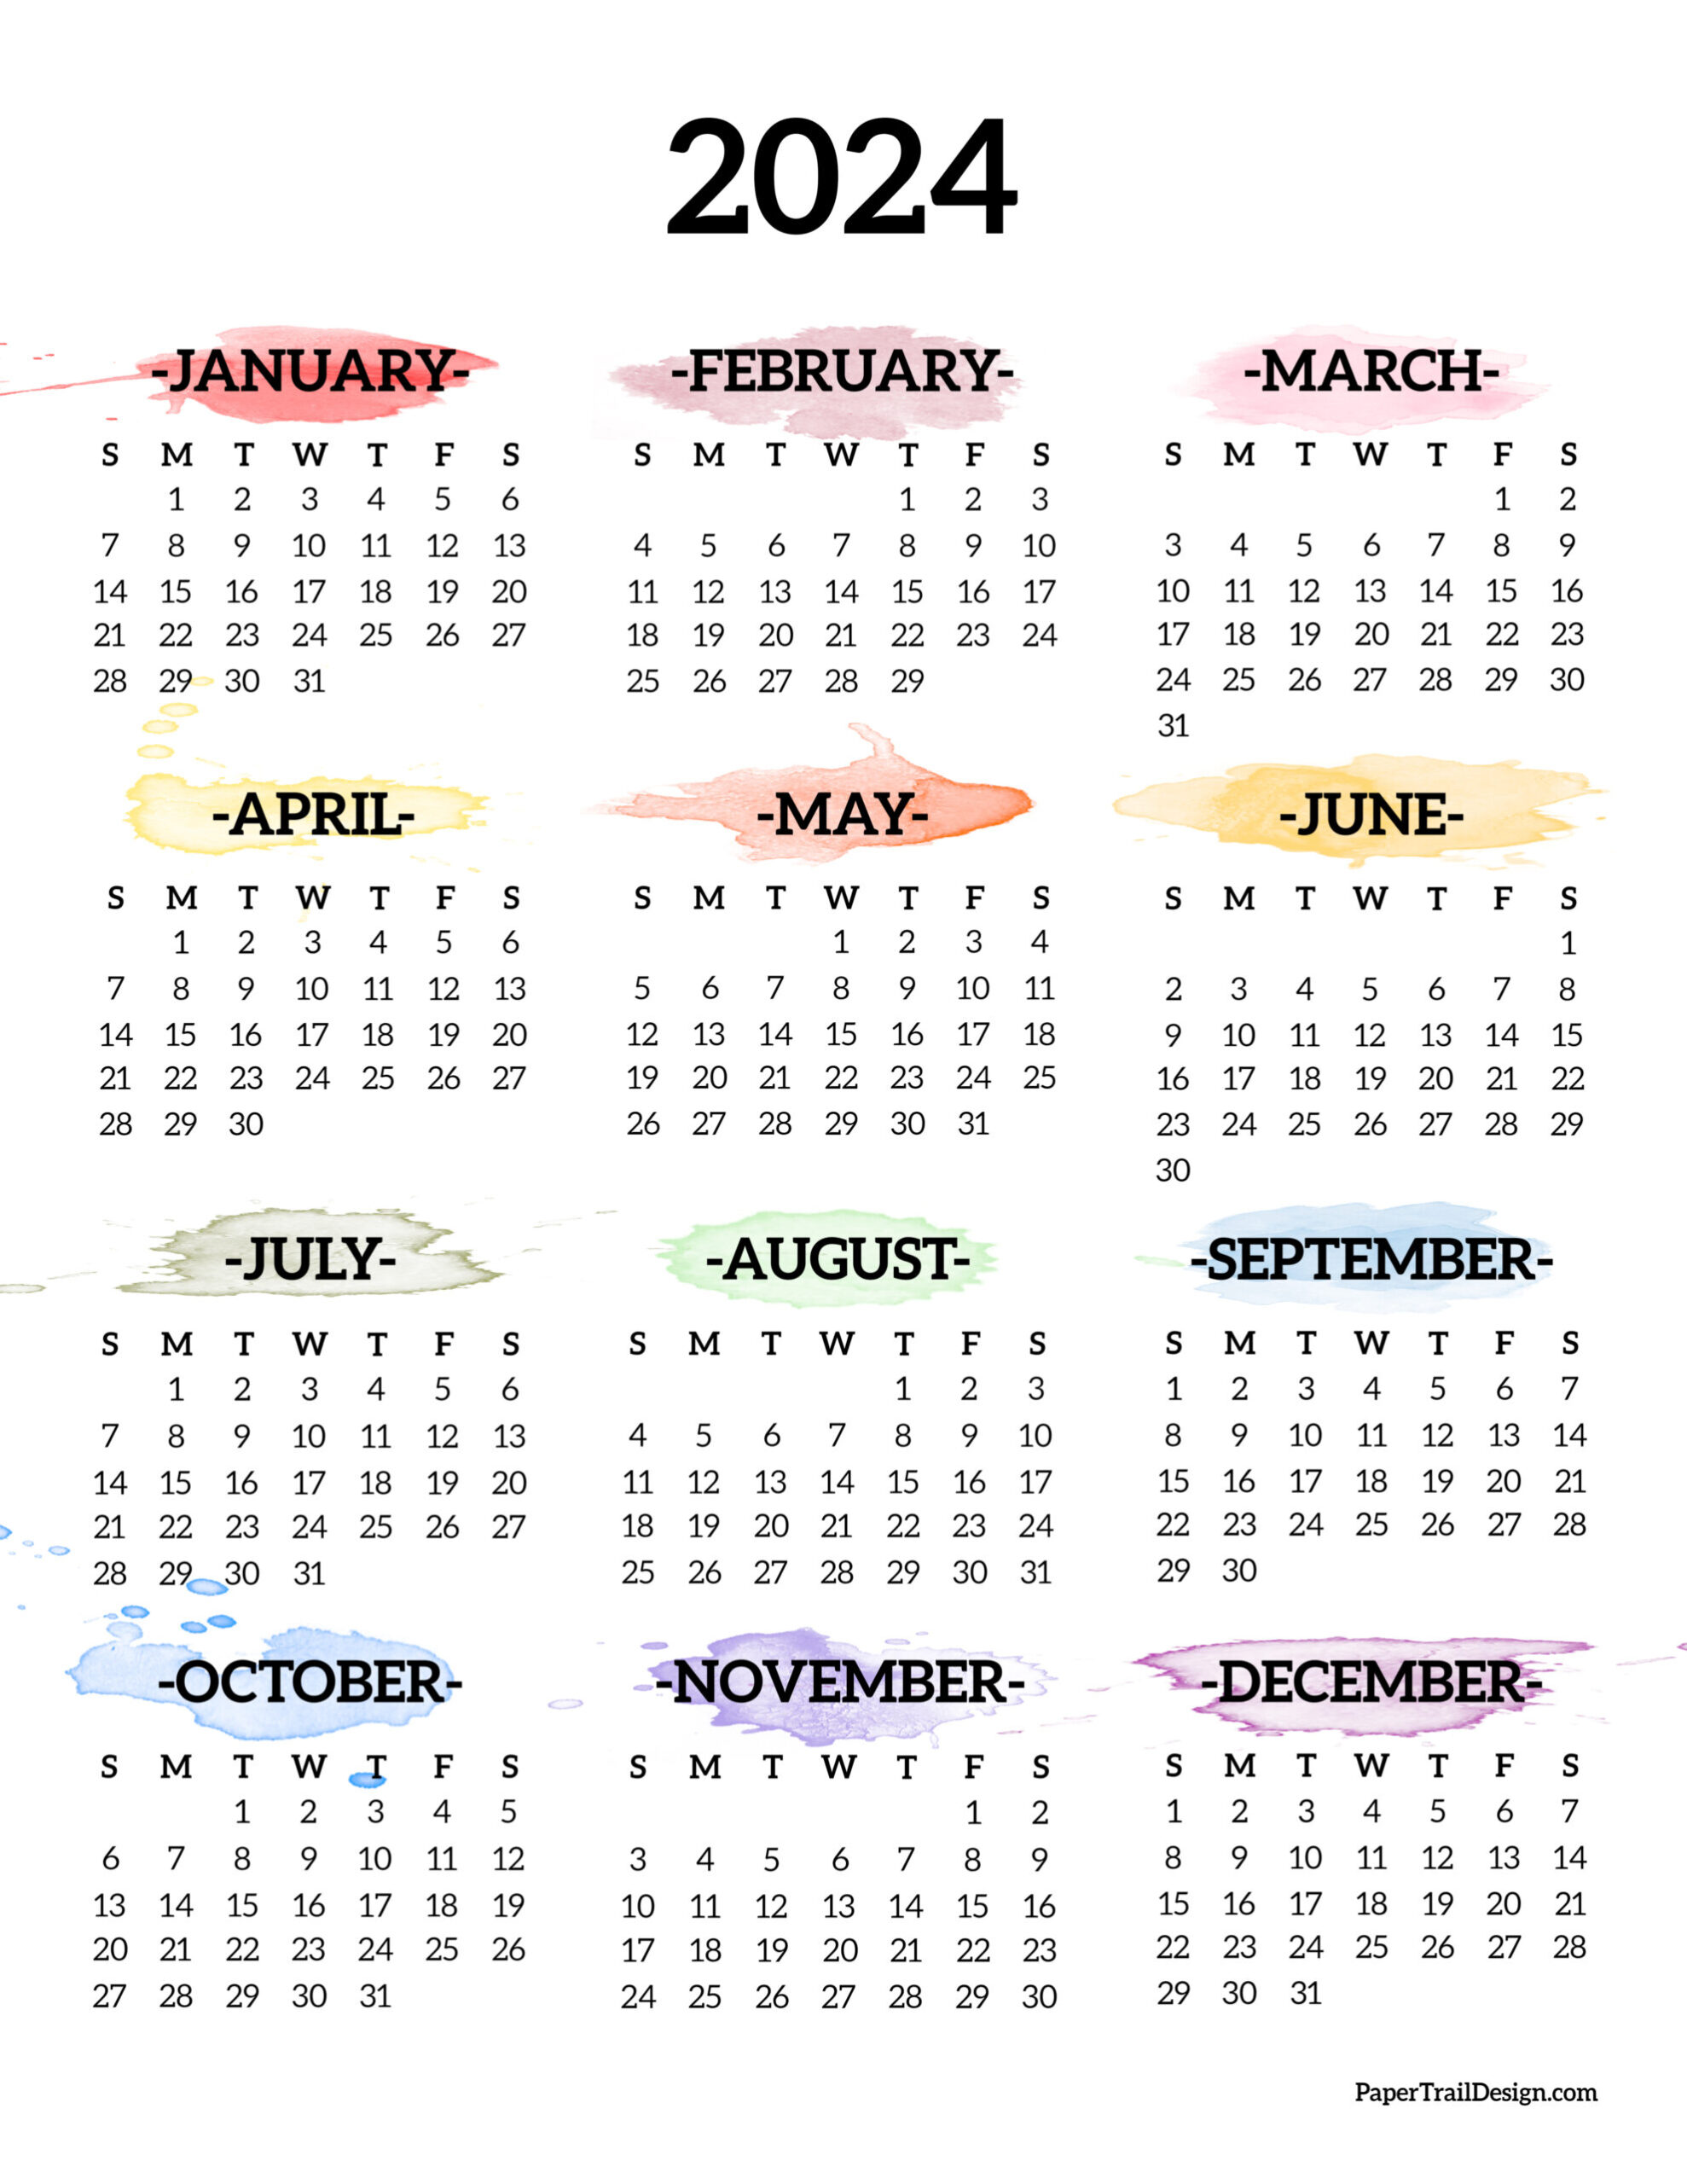 Calendar 2024 Printable One Page - Paper Trail Design for 1 Year Calendar 2024 Printable